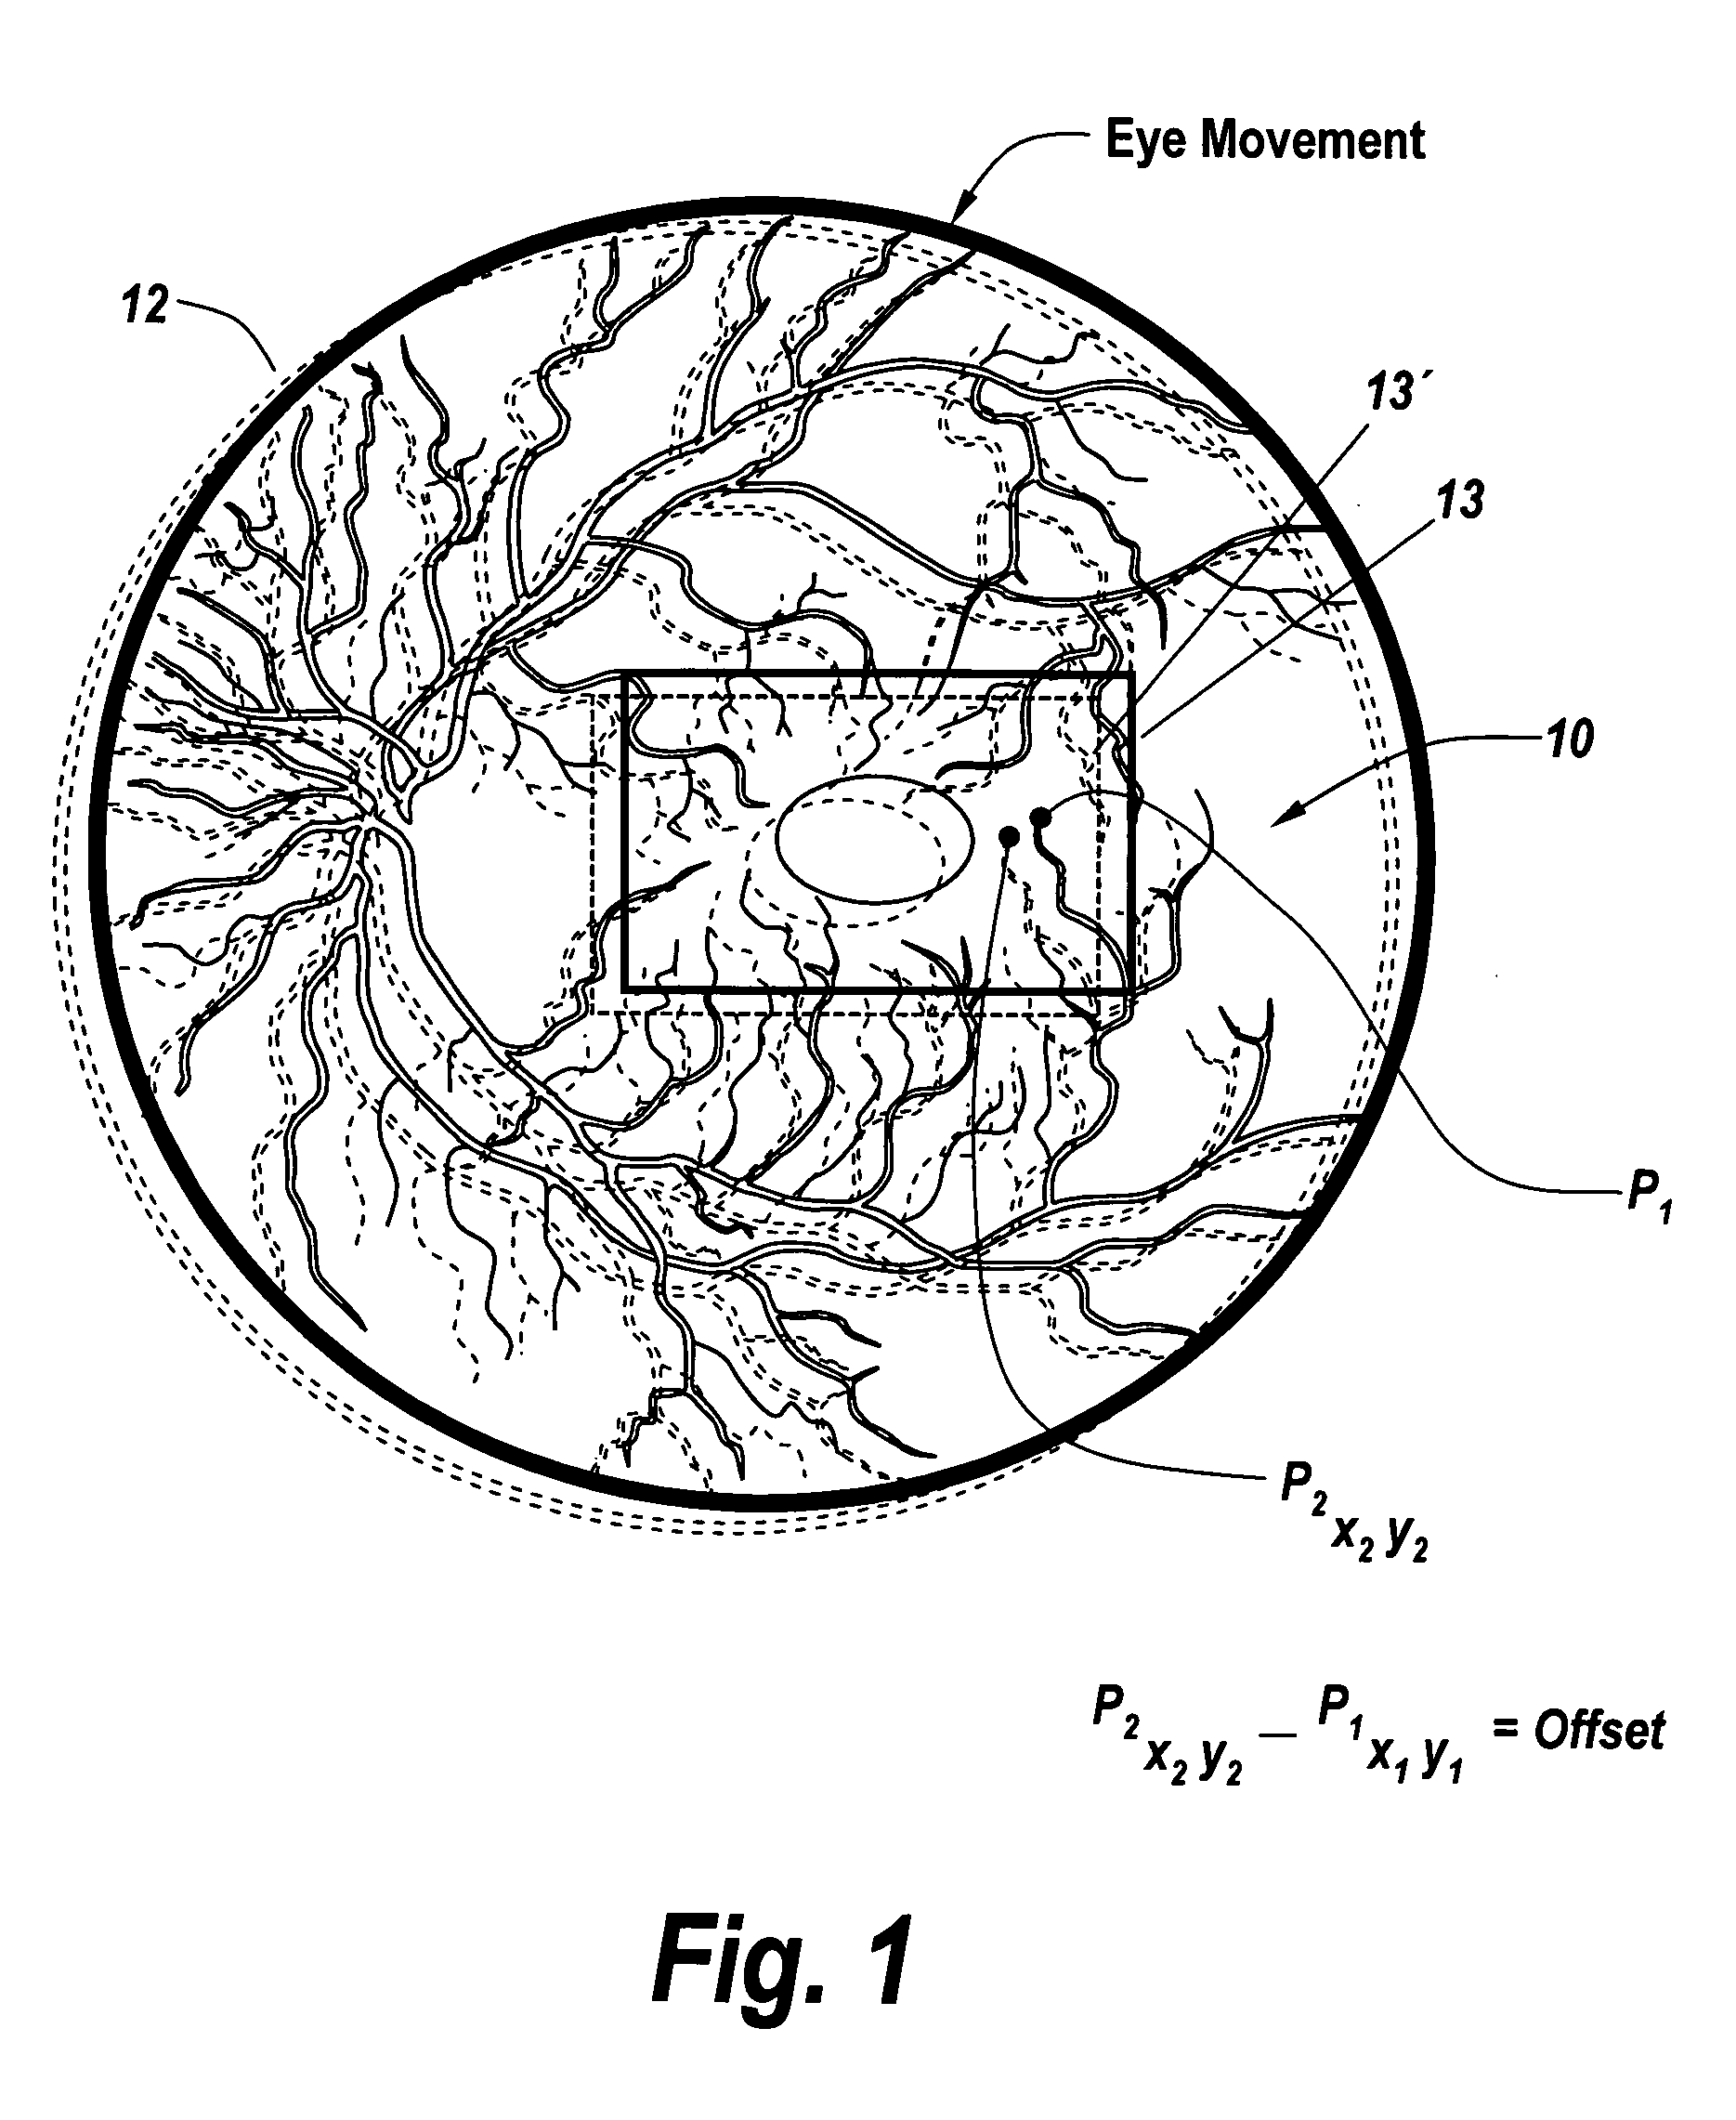 Region based vision tracking system for imaging of the eye for use in optical coherence tomography